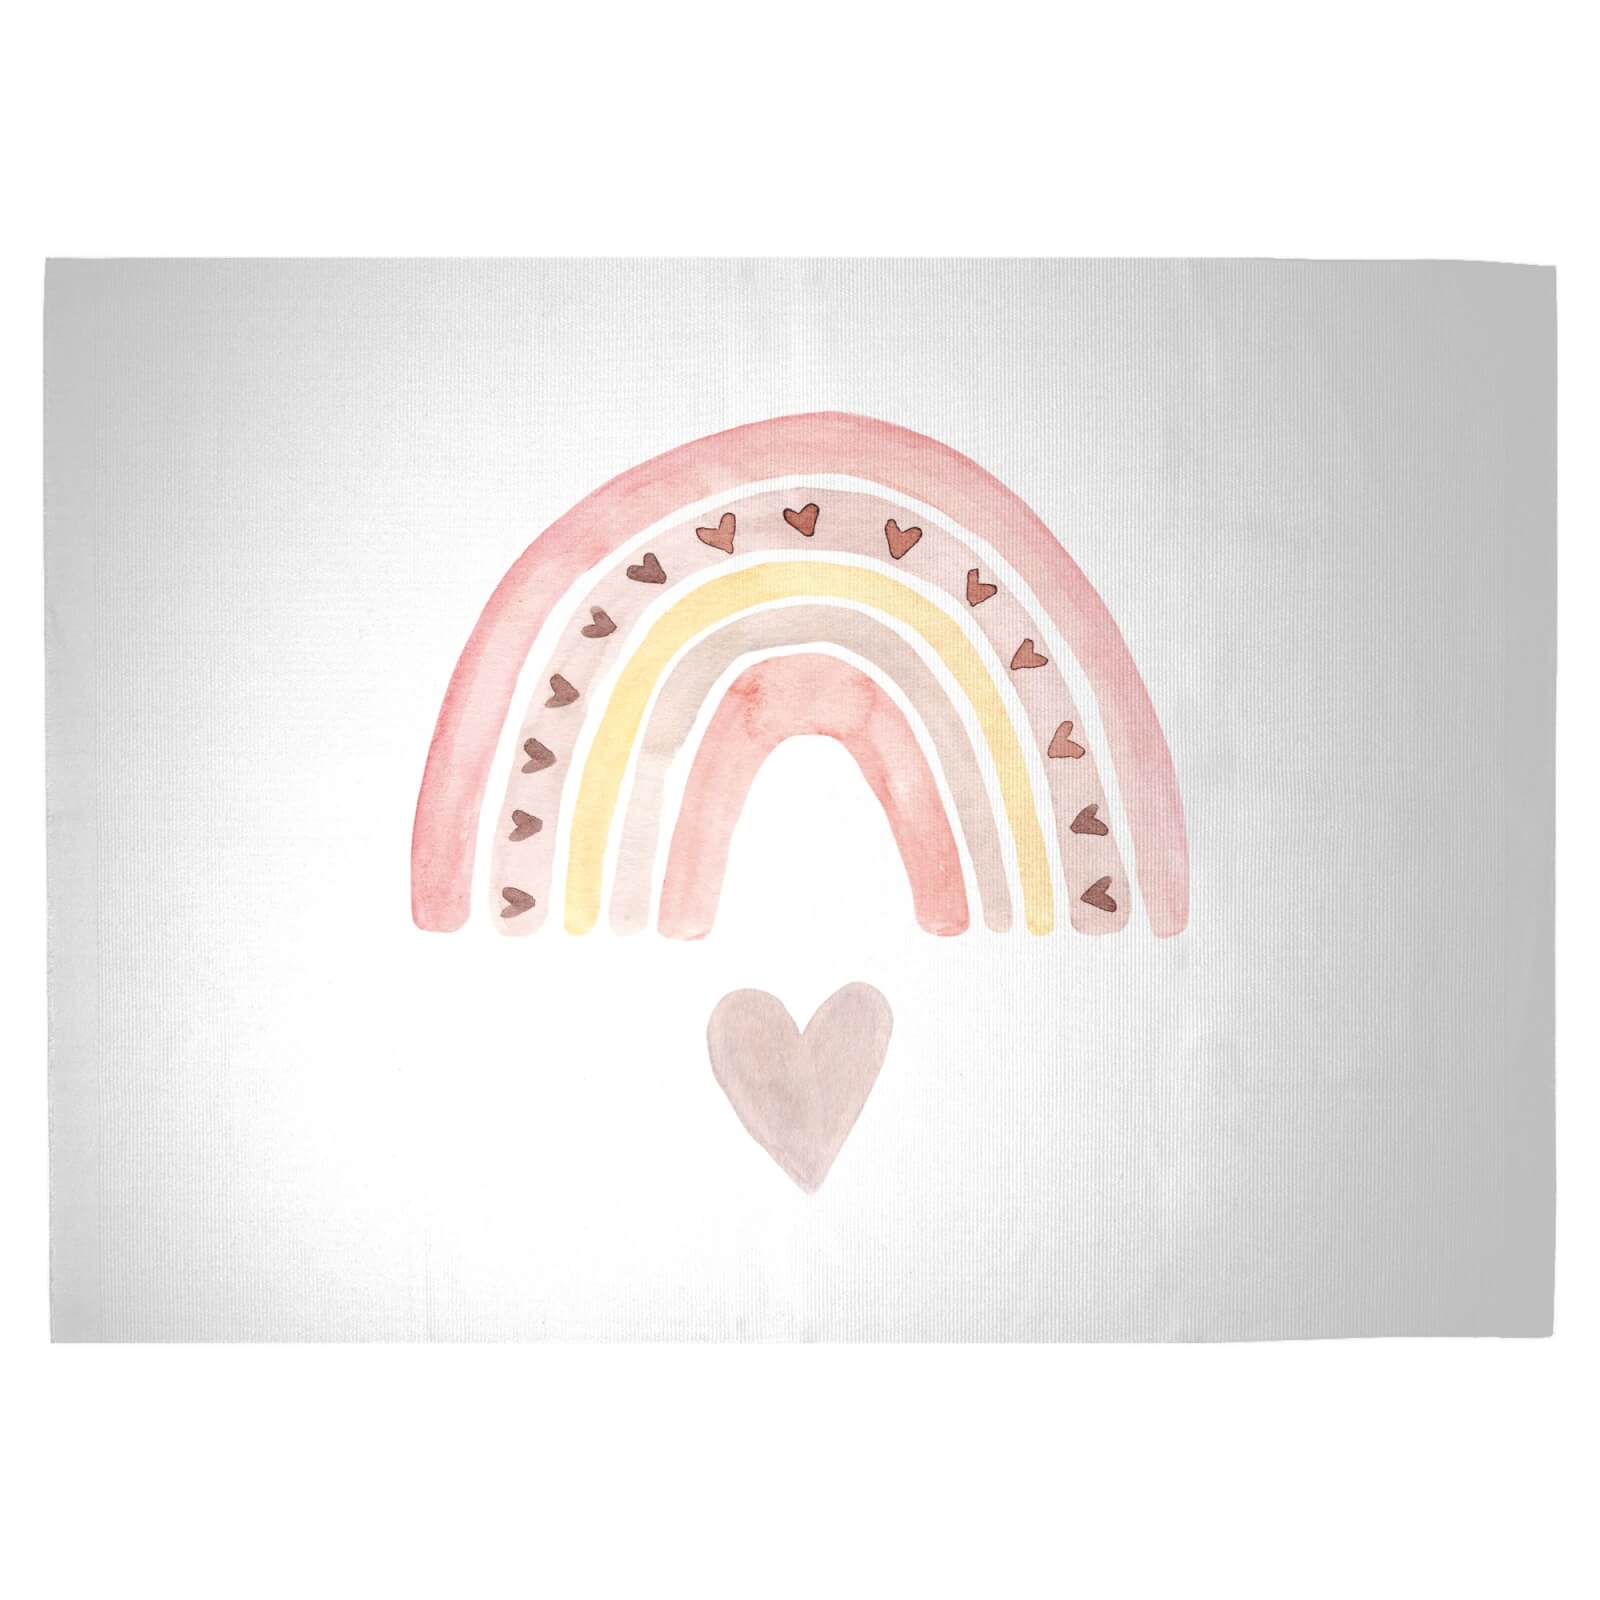 Watercolour Rainbow And Heart Woven Rug - Large